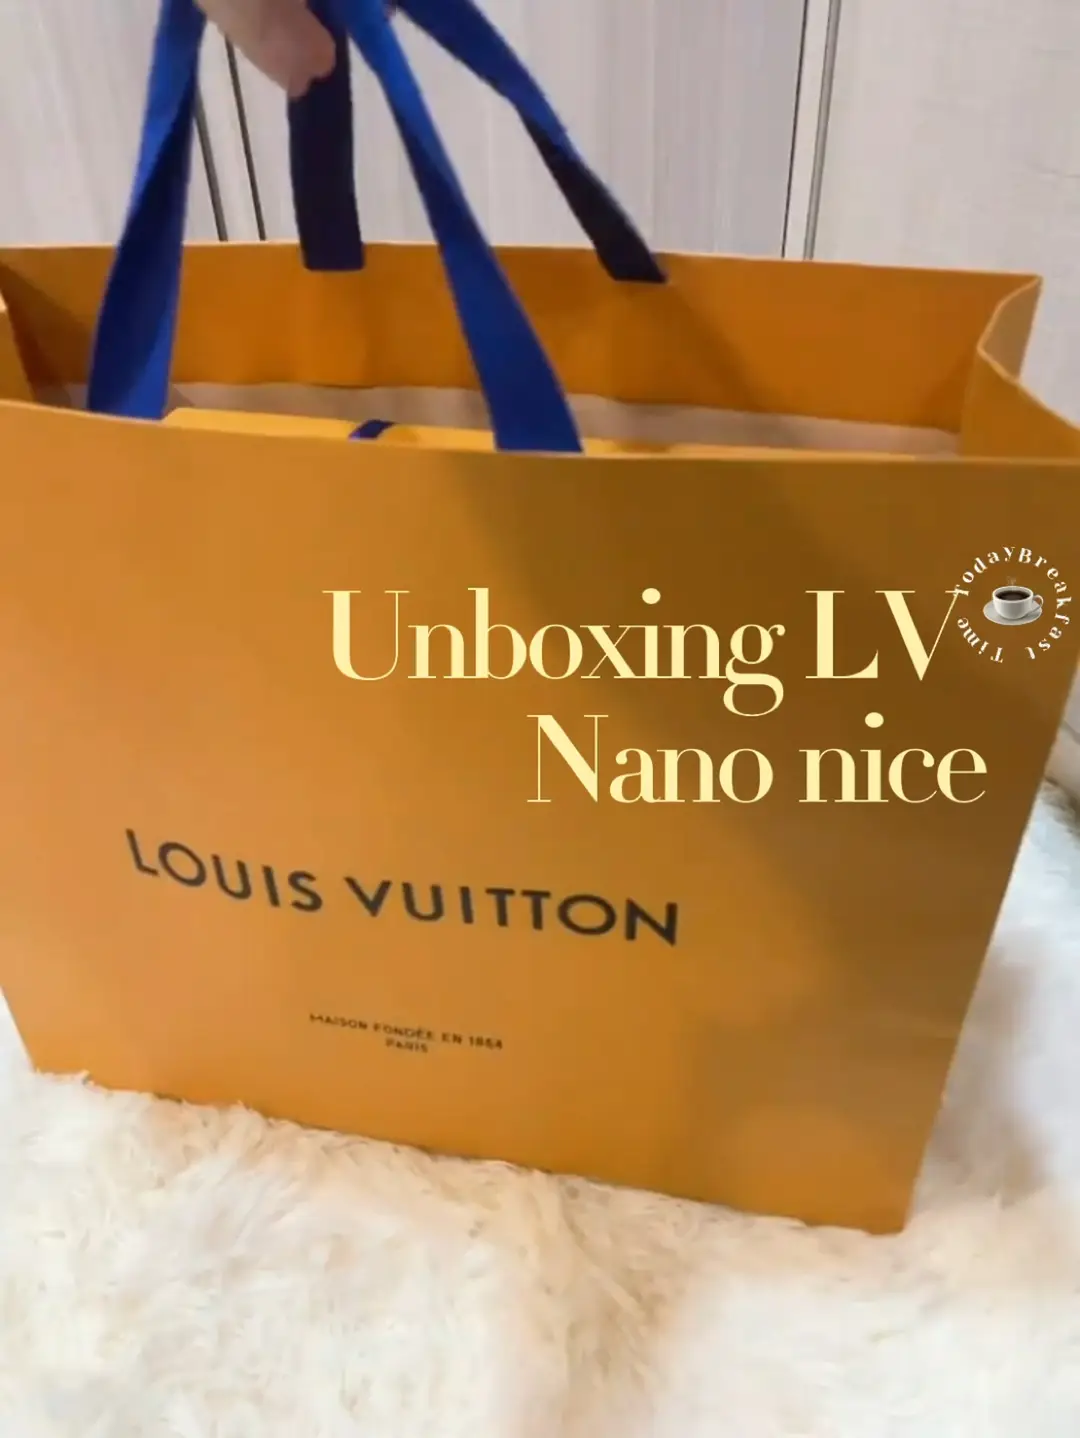 Louis Vuitton Loop Hobo Bag UNBOXING, NEW, What Fits?, First Look and  Review